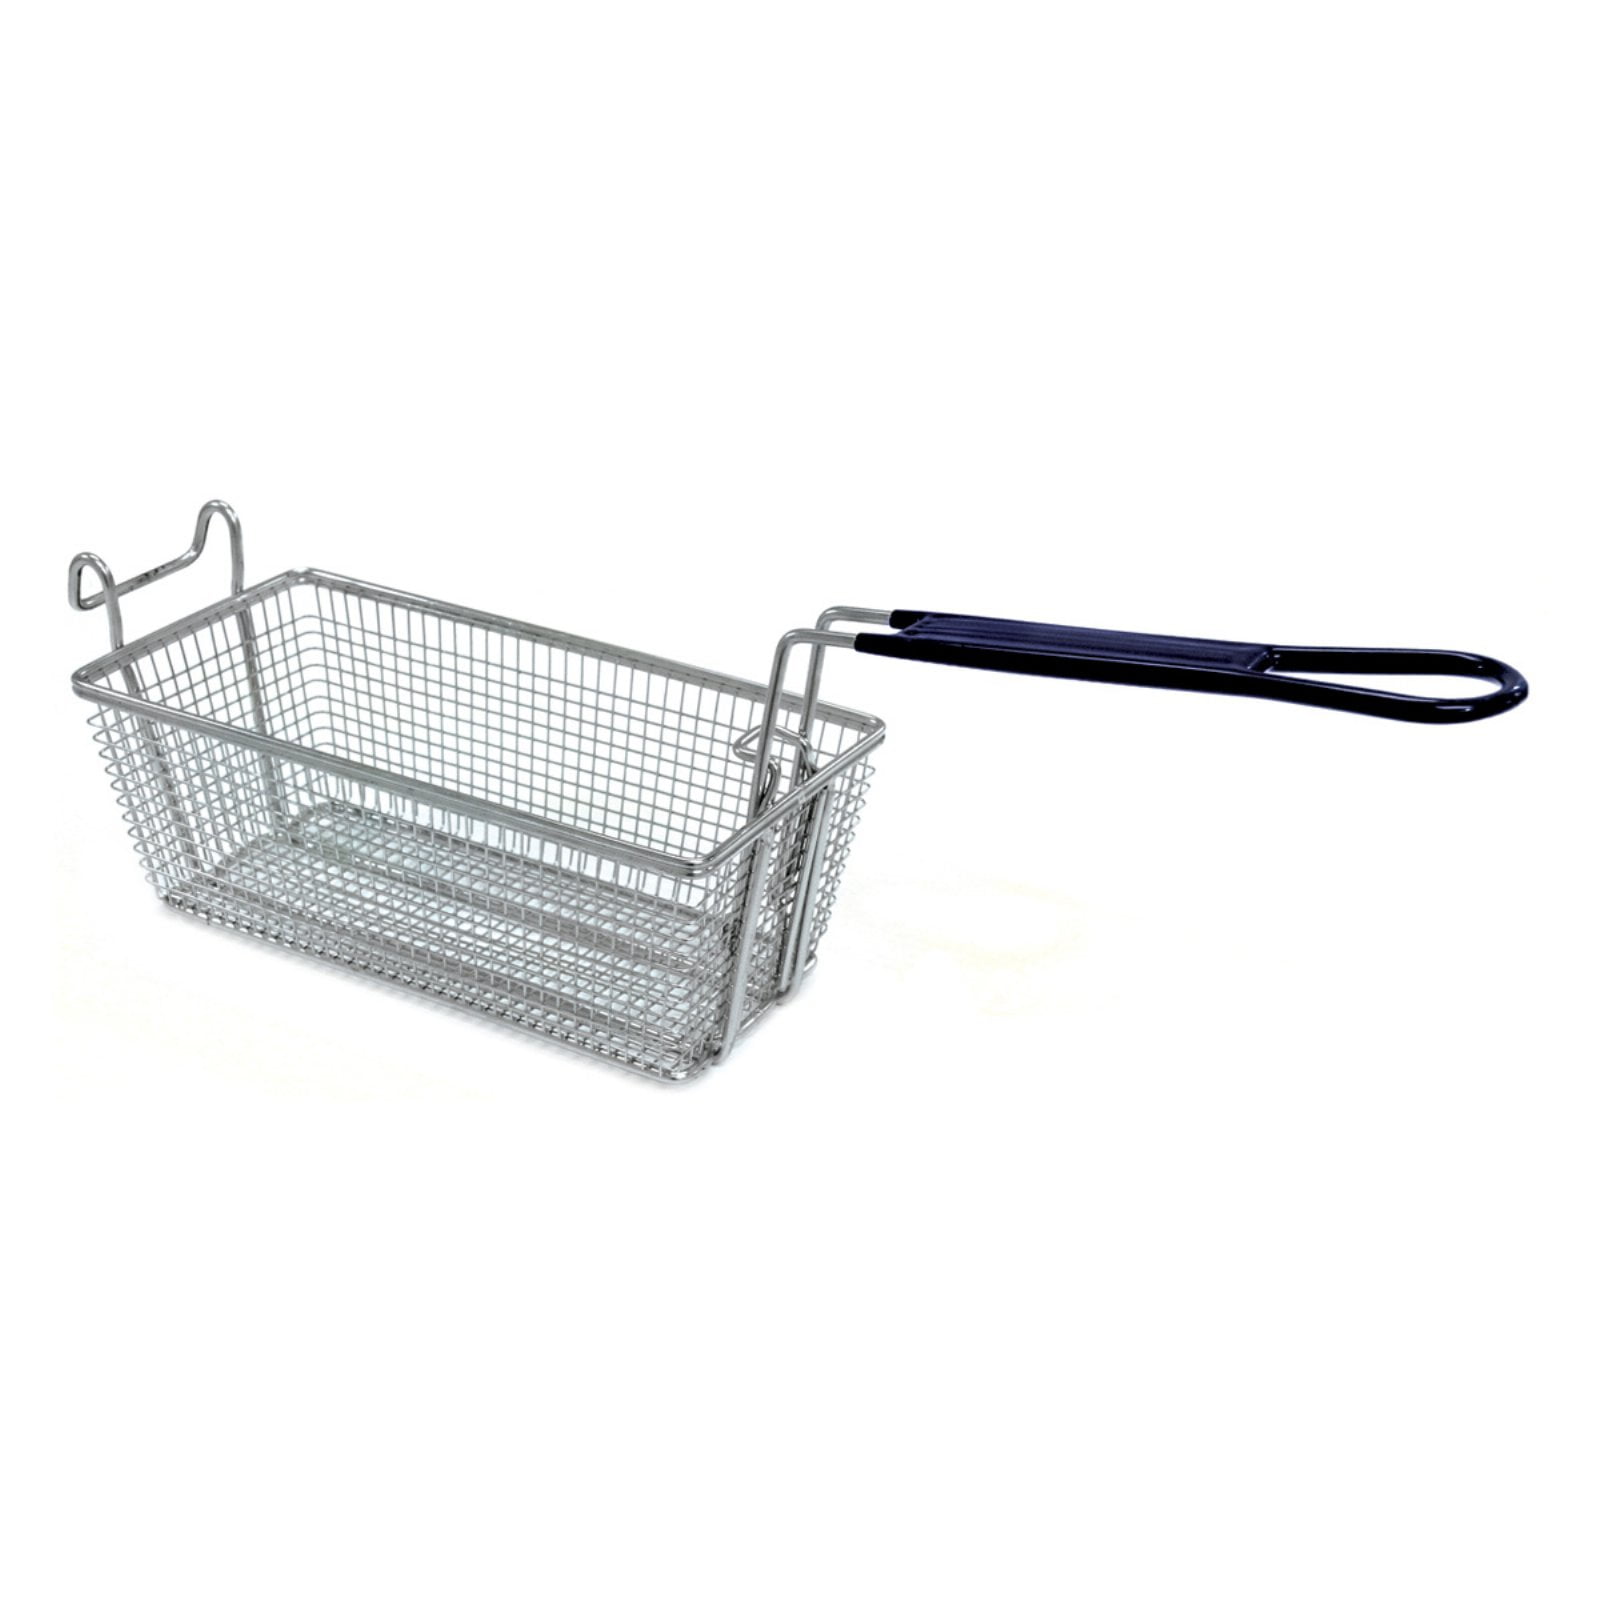 Bayou Classic 0835 Complete Poultry Frying Rack 9.75'' in L x 9.5'' in W USED 